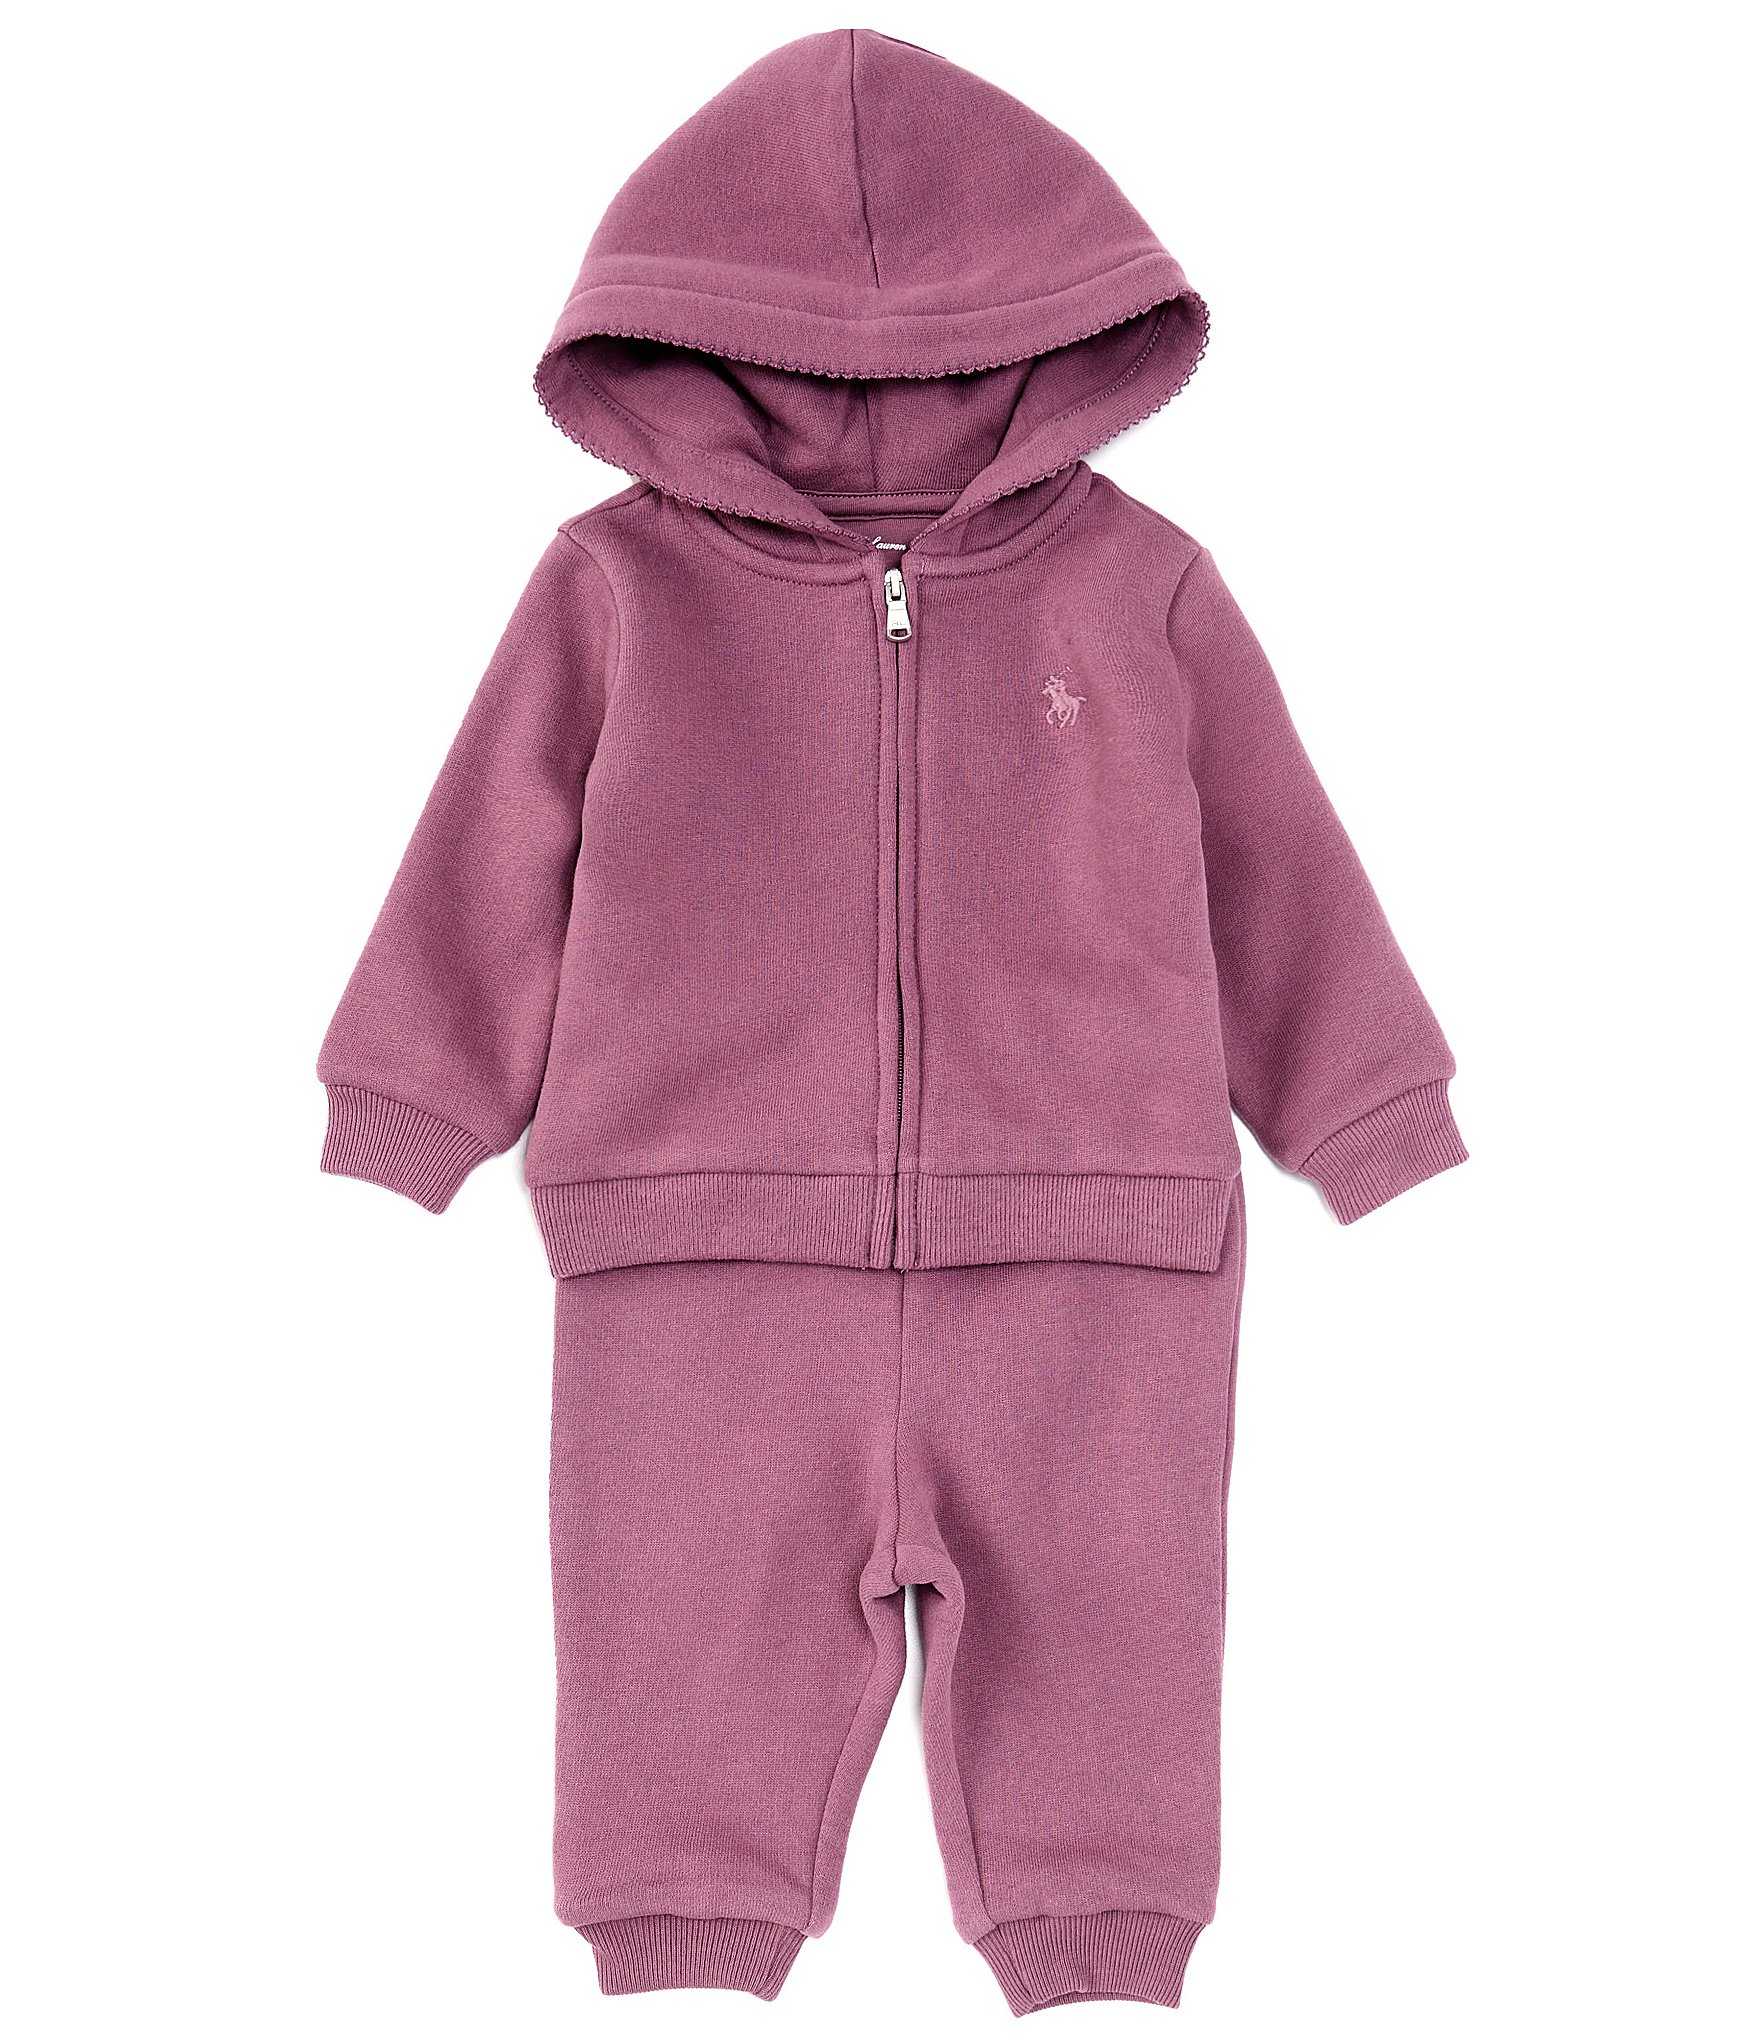 2pcs Baby Boy/Girl Solid Long-sleeve Terry Hoodie and Pants Set